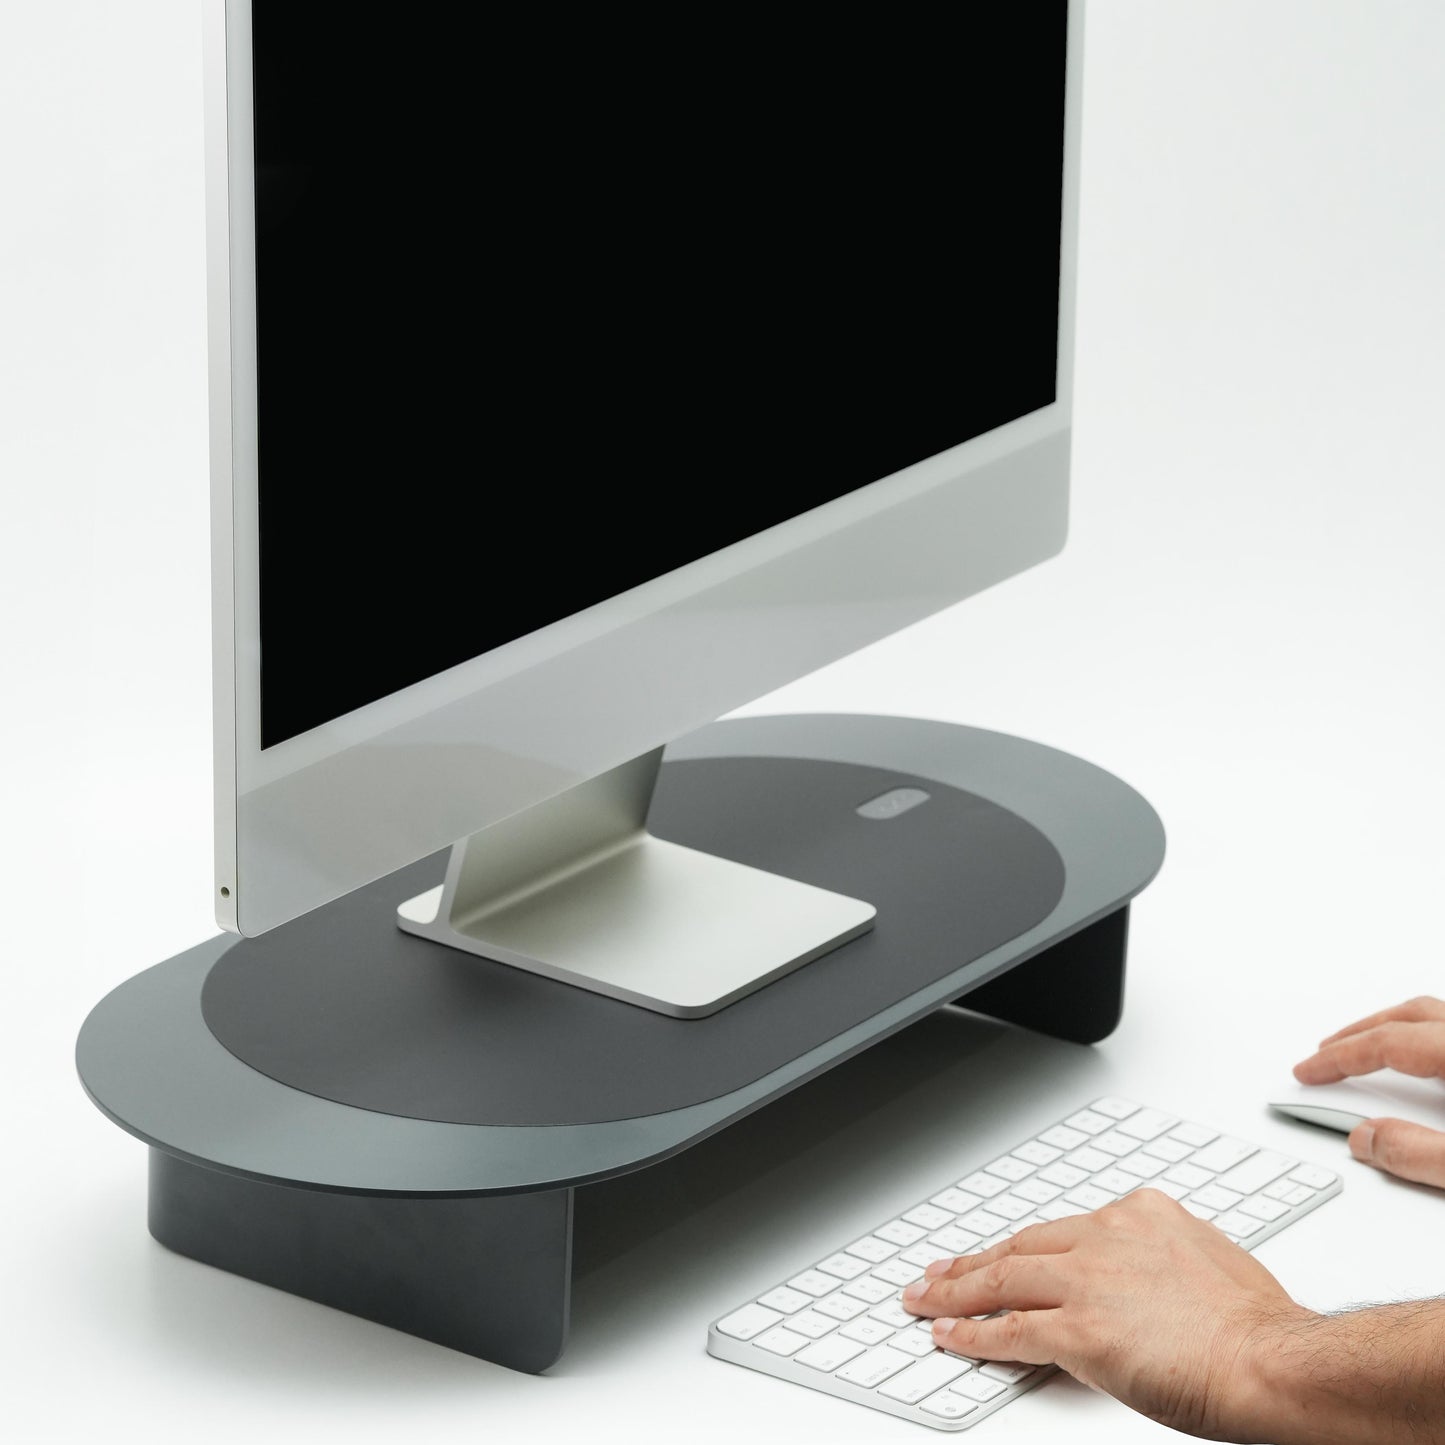 LOOP Monitor Stand - Graphite